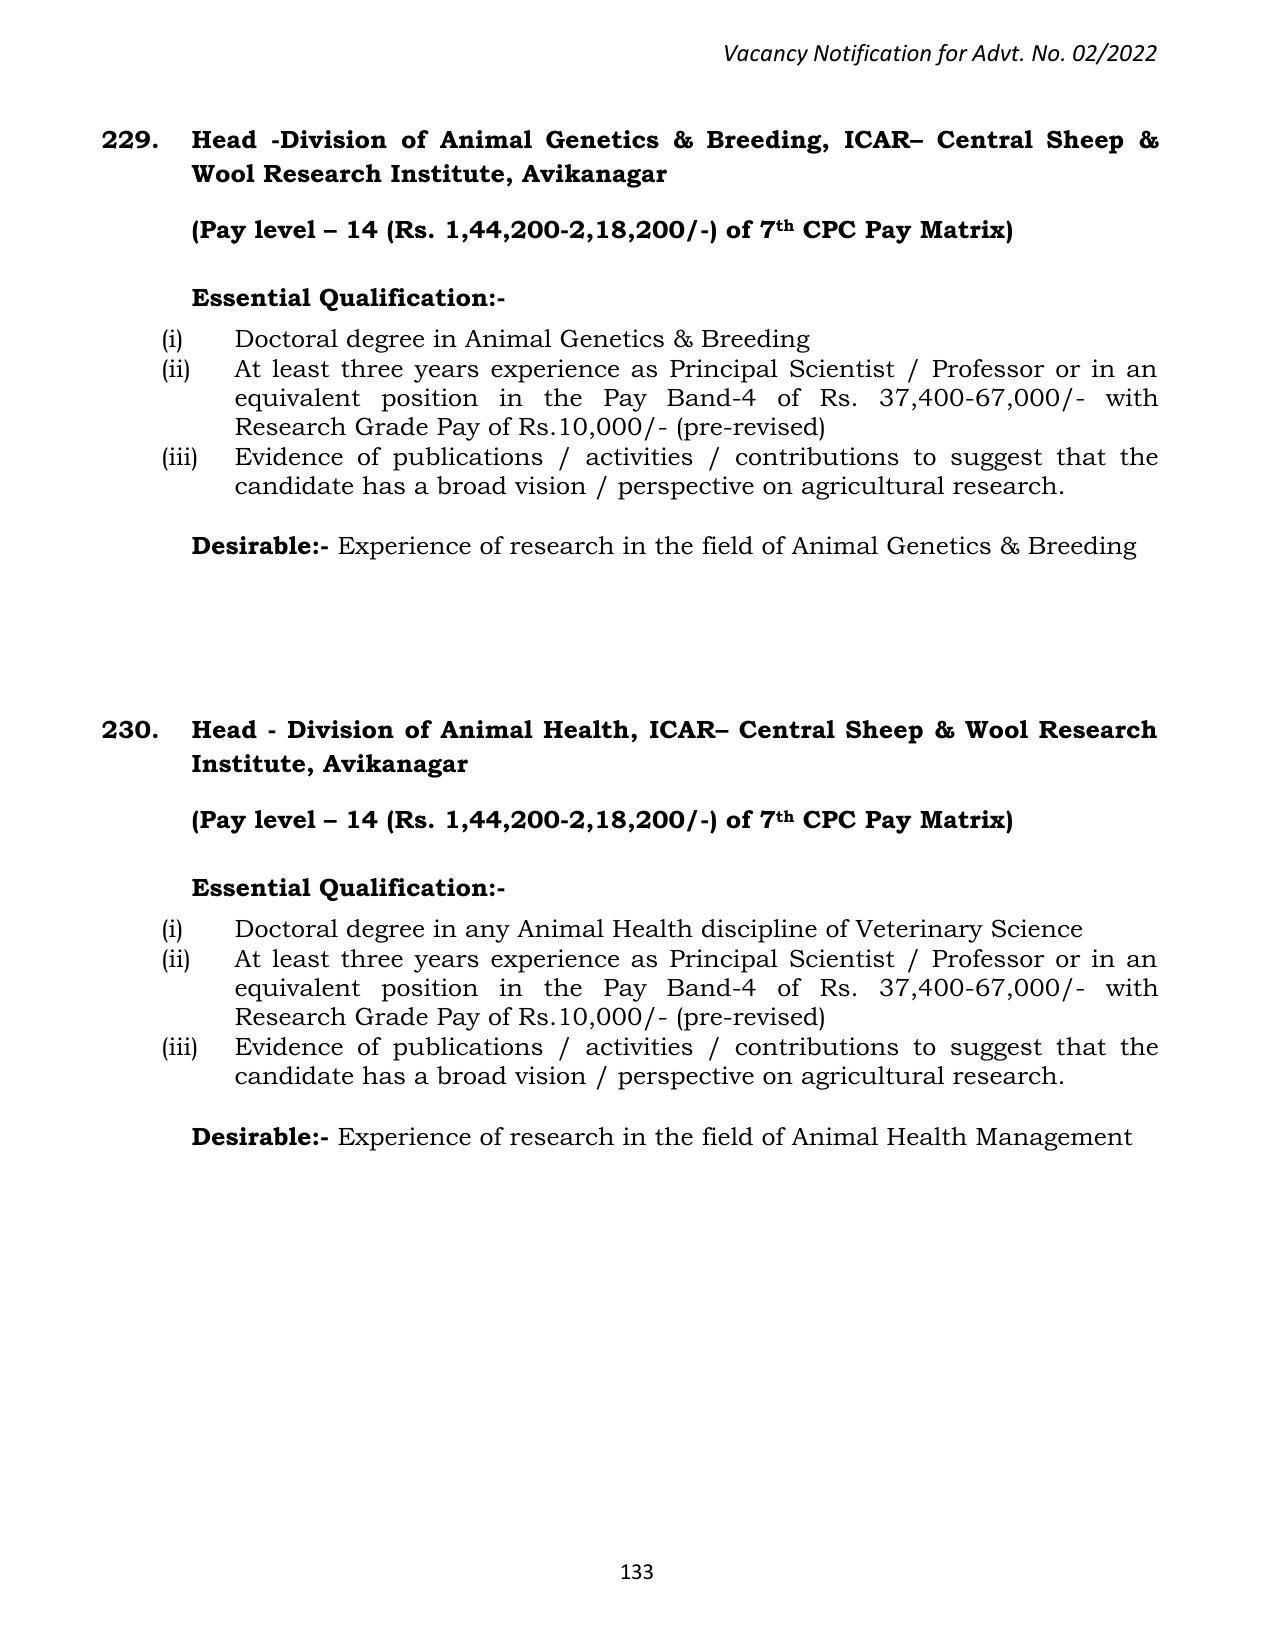 ASRB Non-Research Management Recruitment 2022 - Page 187